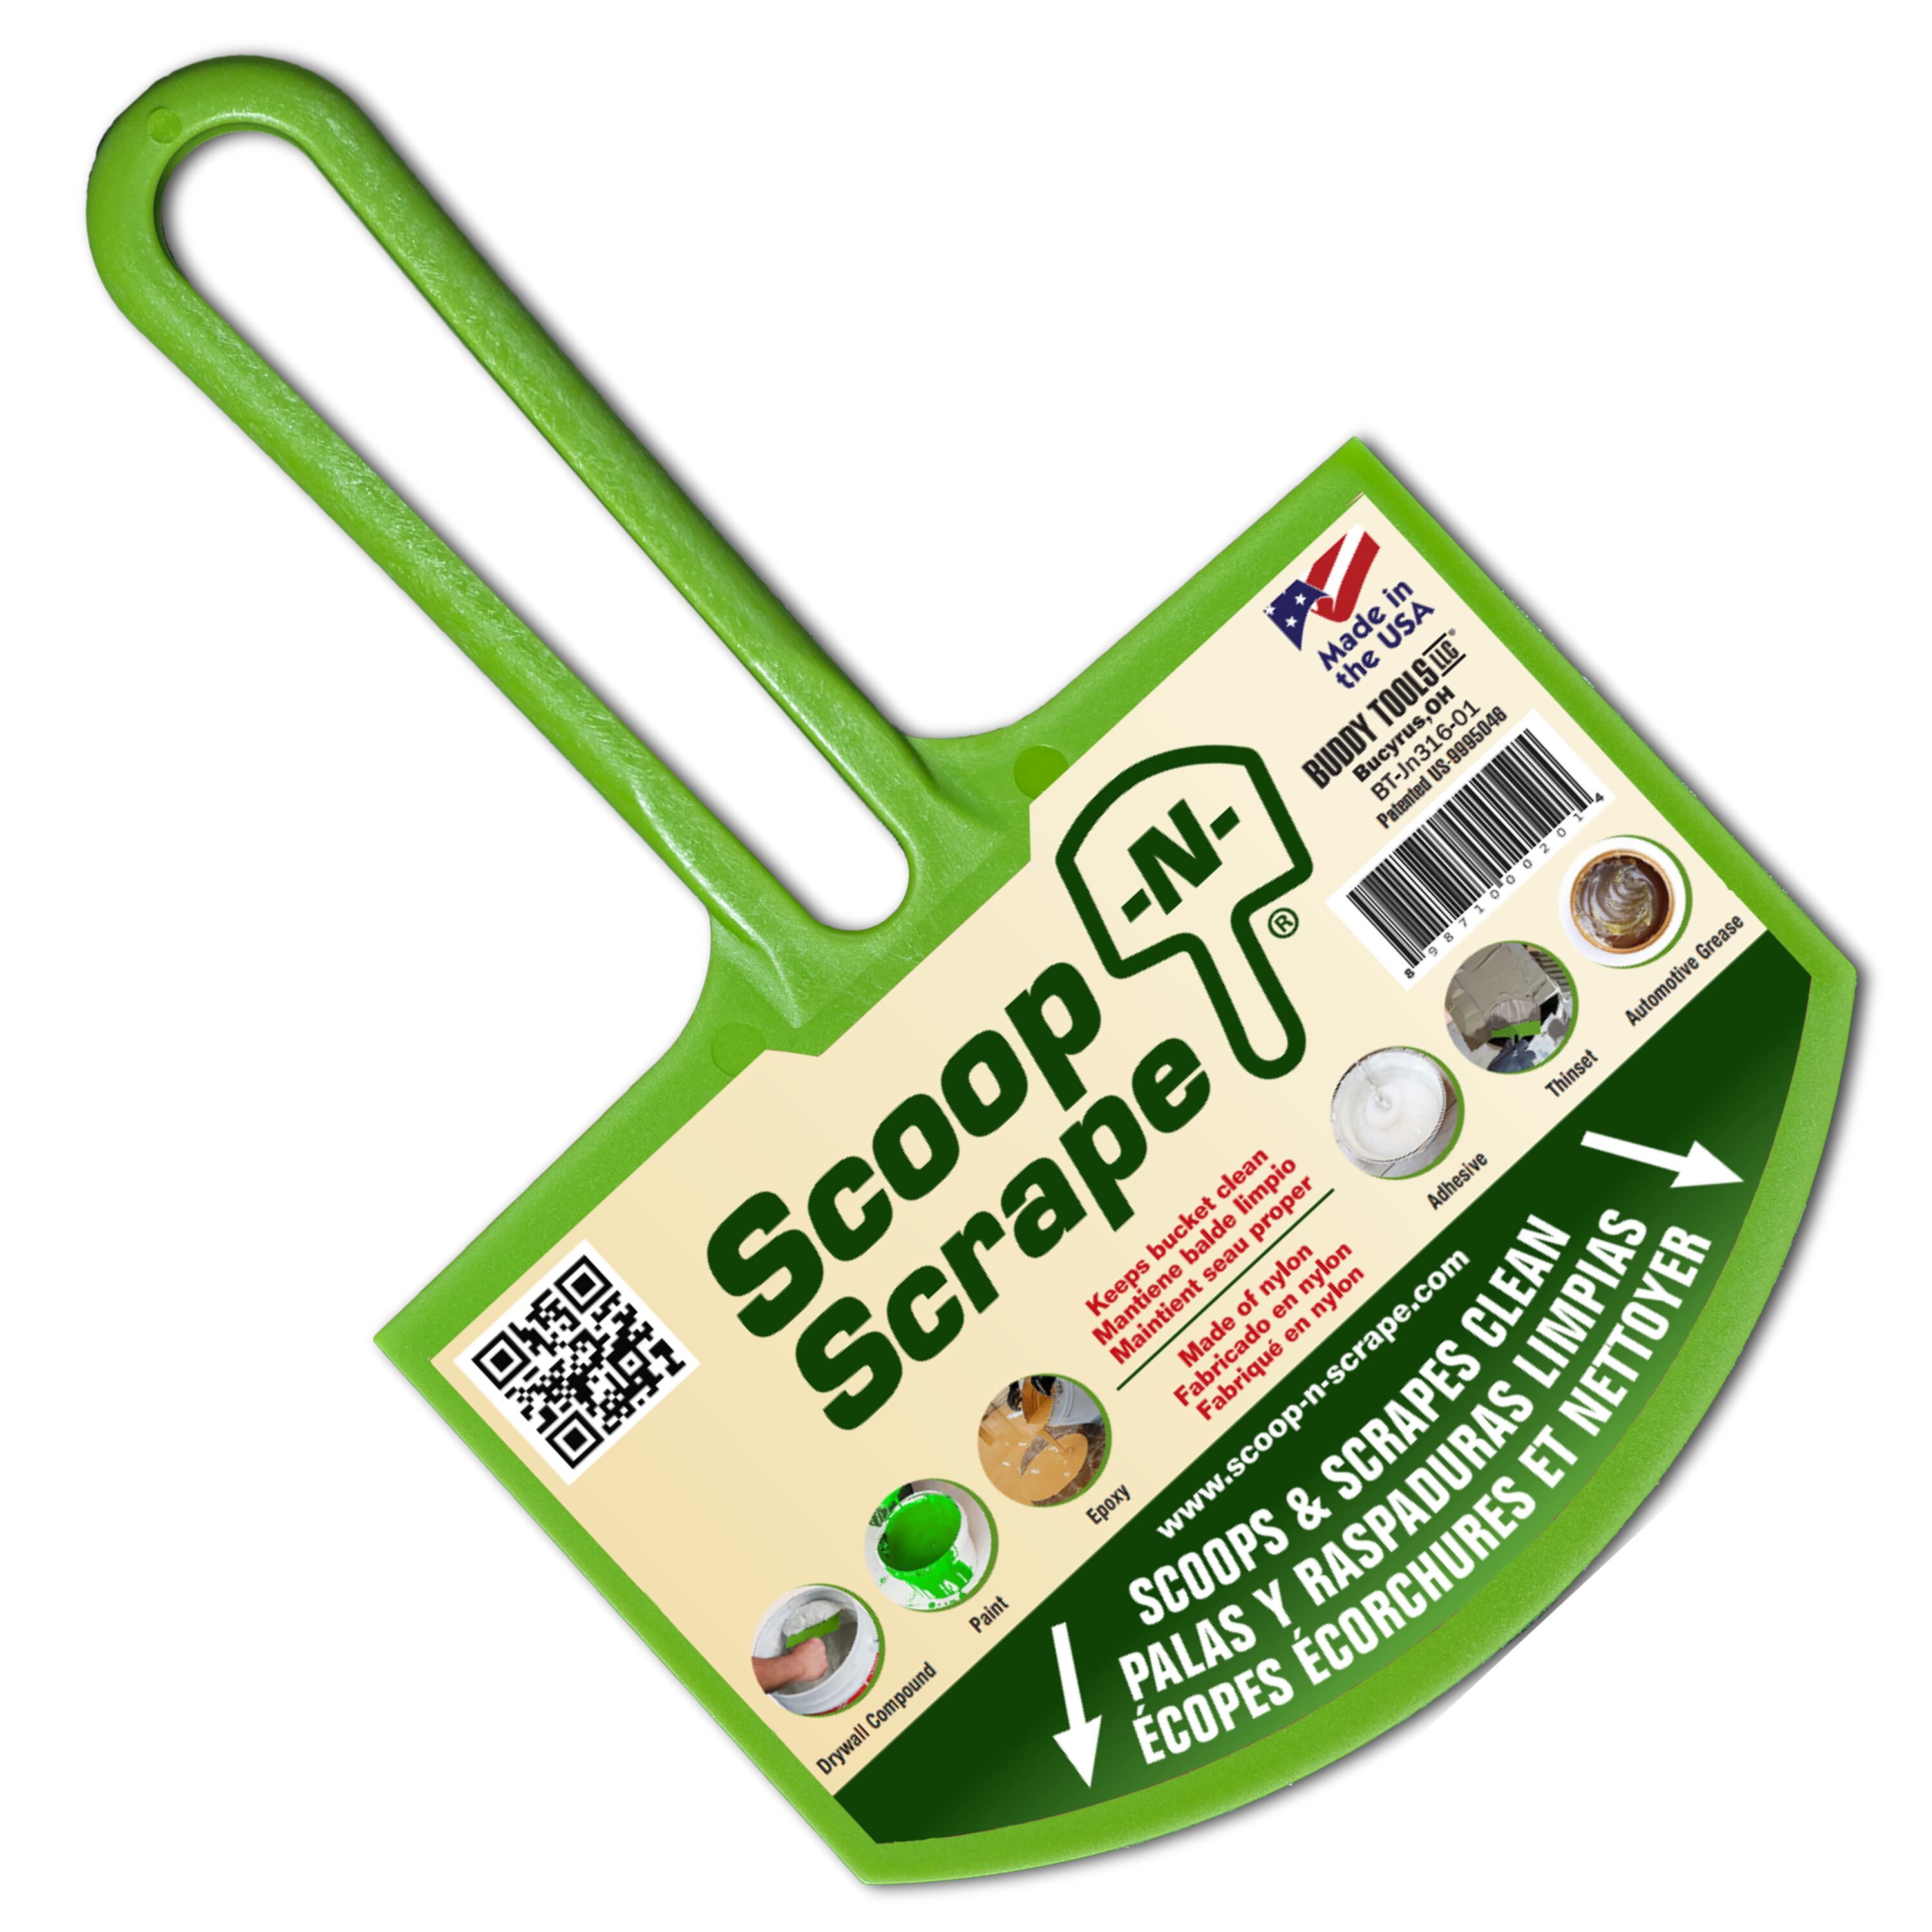 Scraper Tool Set Flexible Kitchen Cleaning Tool, Small Durable